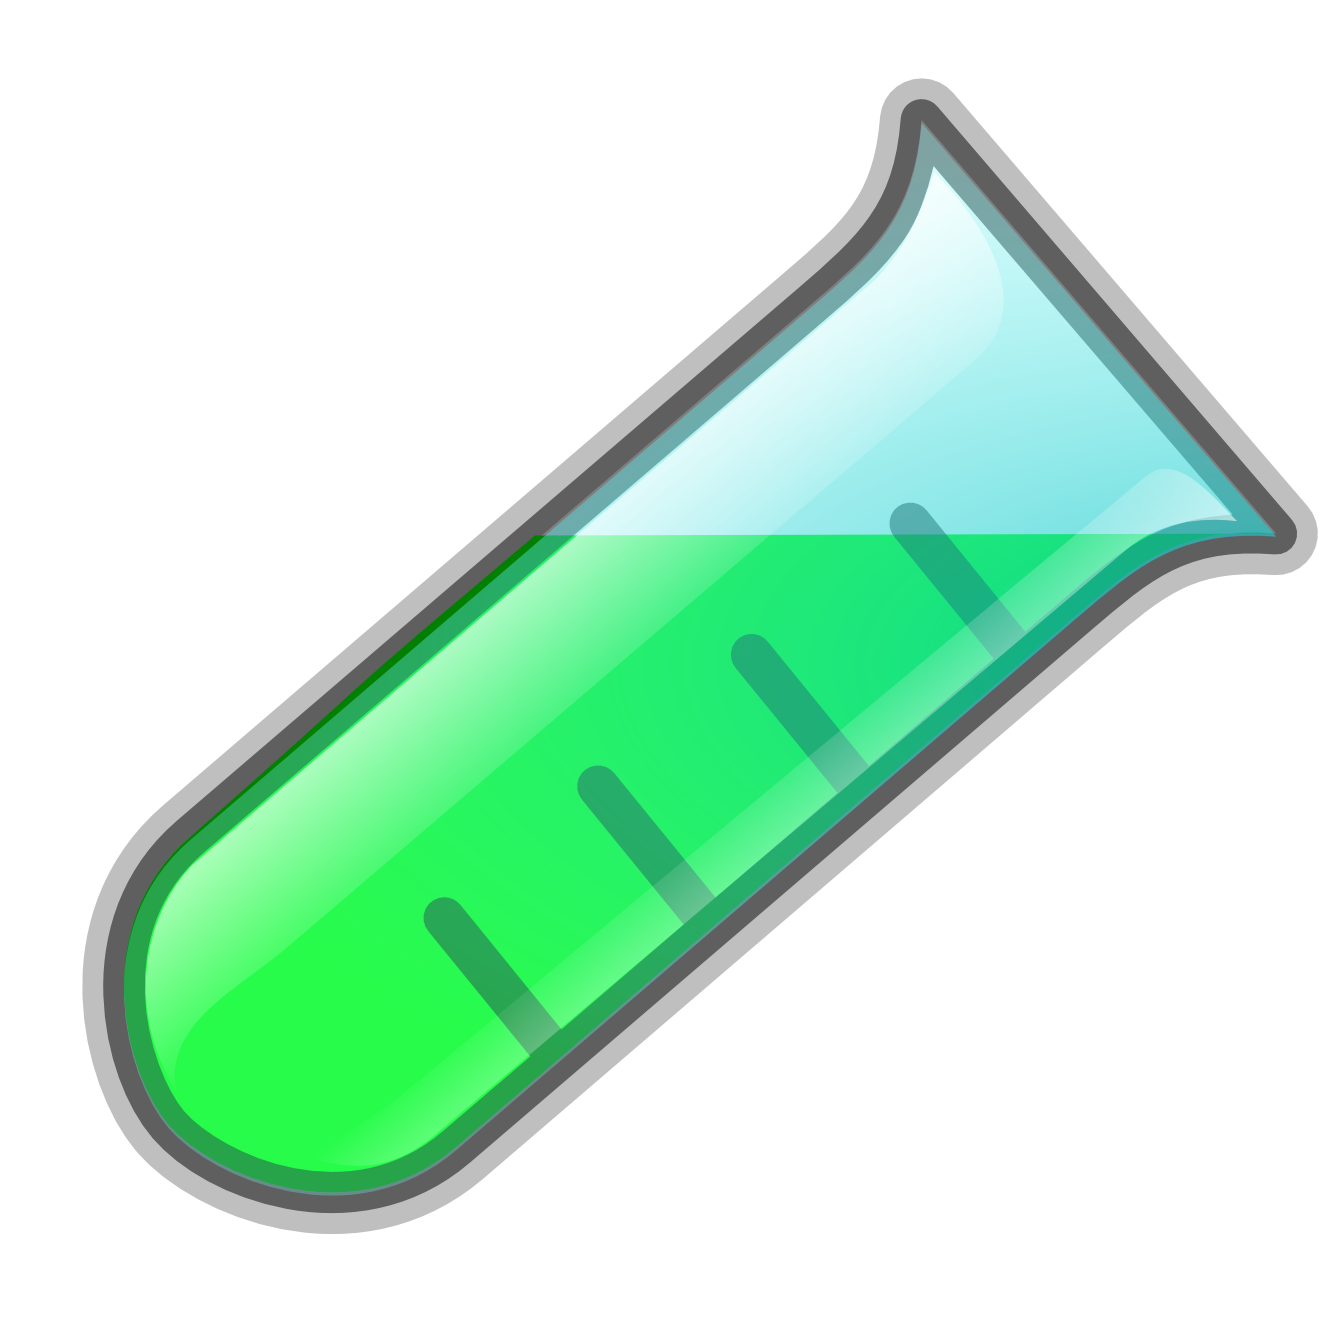 lab icon test tube | Clipart Panda - Free Clipart Images